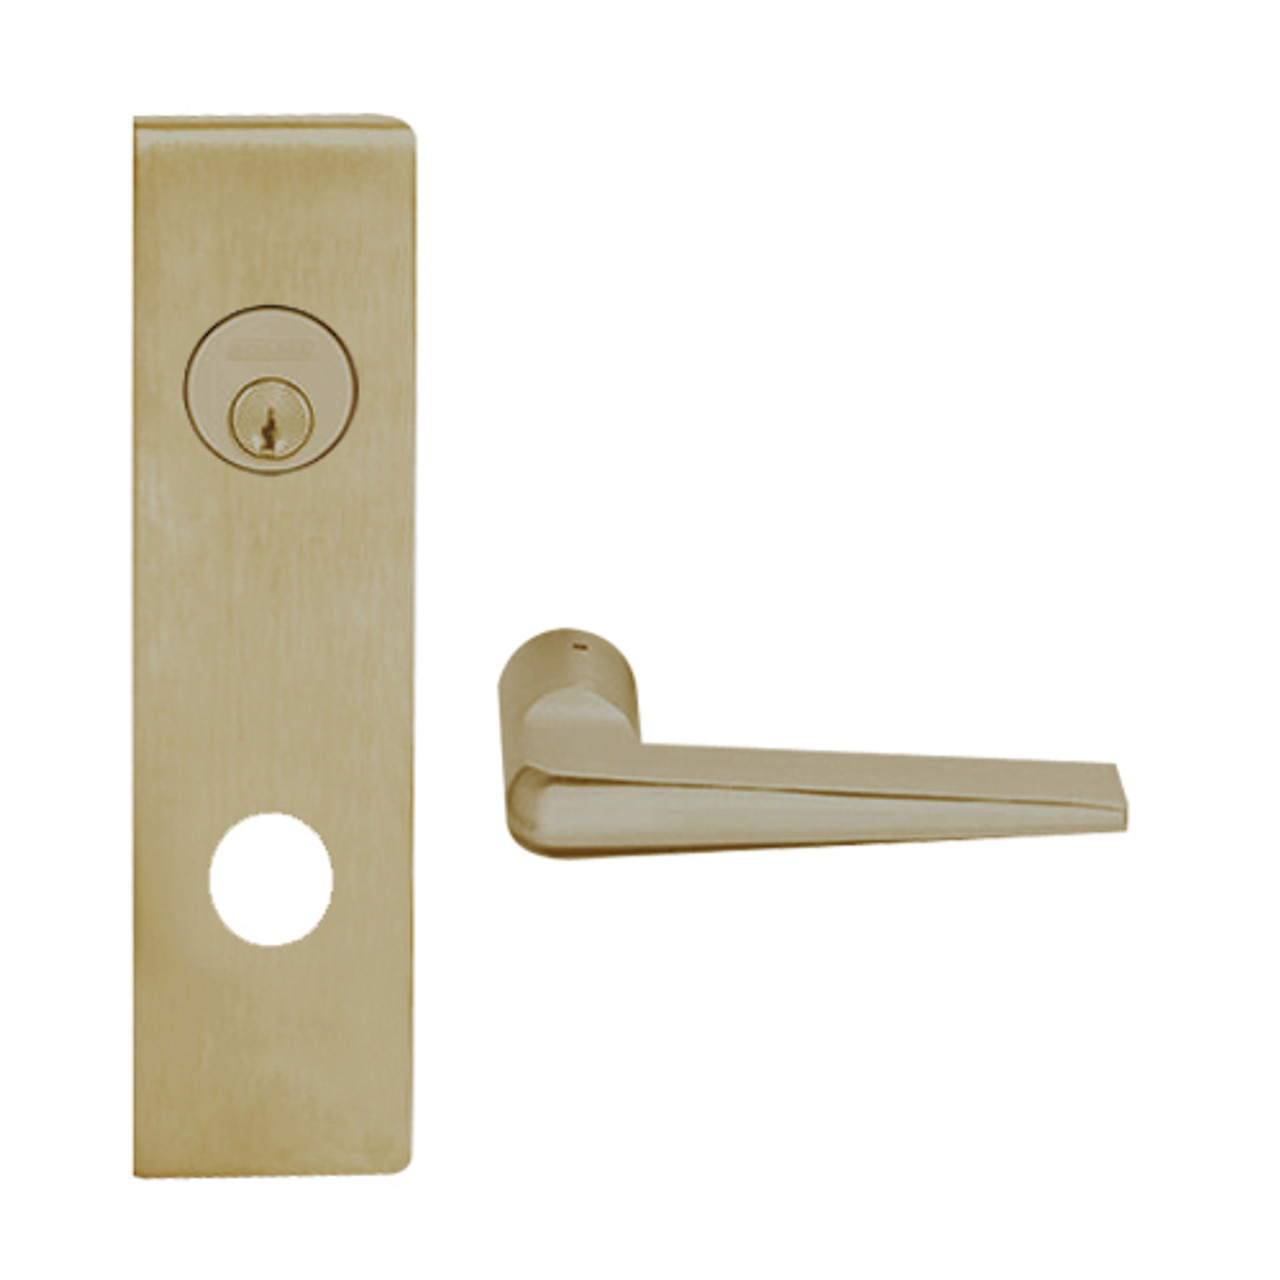 L9453L-05N-613 Schlage L Series Less Cylinder Entrance with Deadbolt Commercial Mortise Lock with 05 Cast Lever Design in Oil Rubbed Bronze